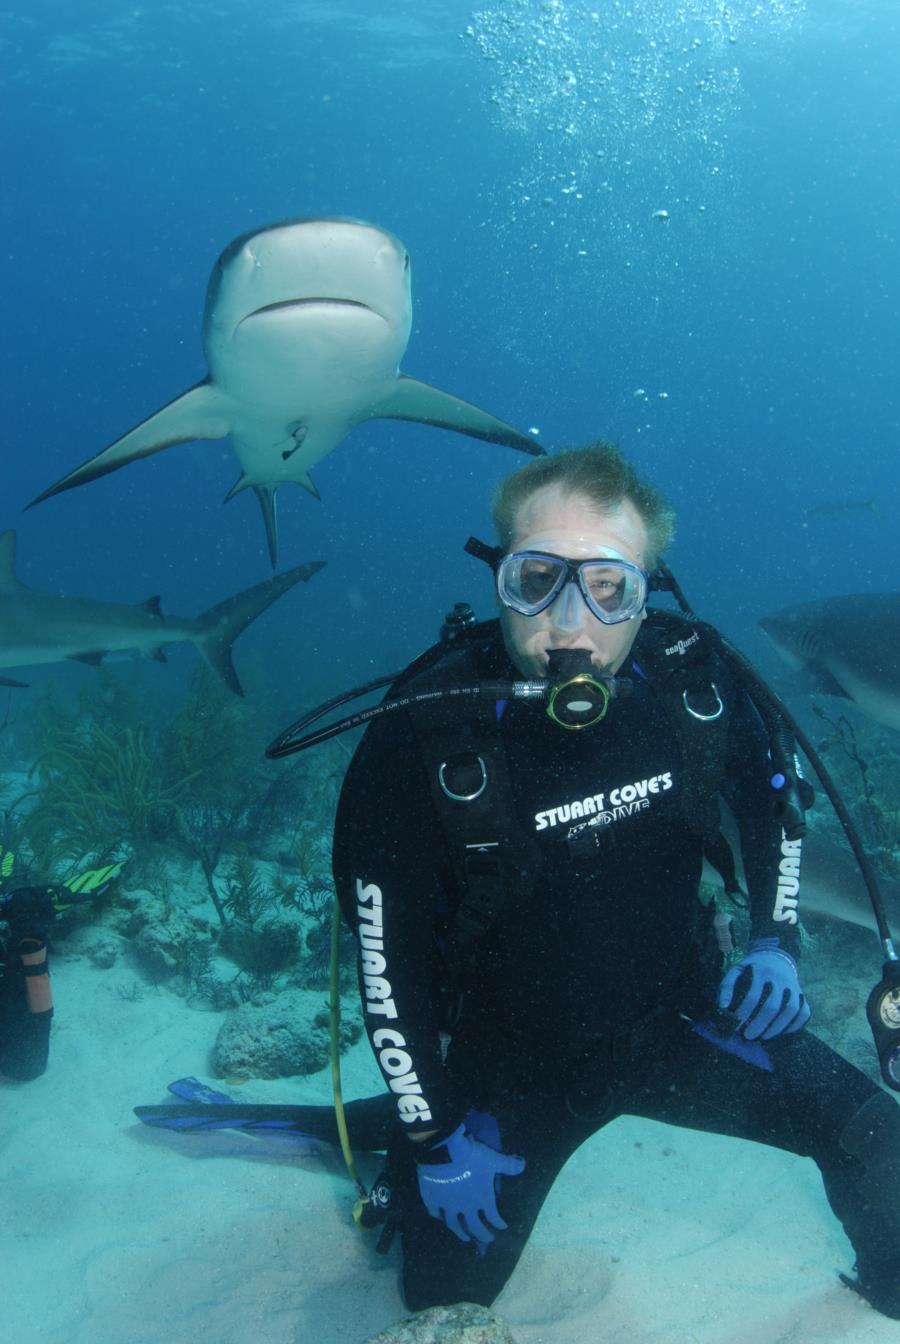 Shark diving in the Bahamas